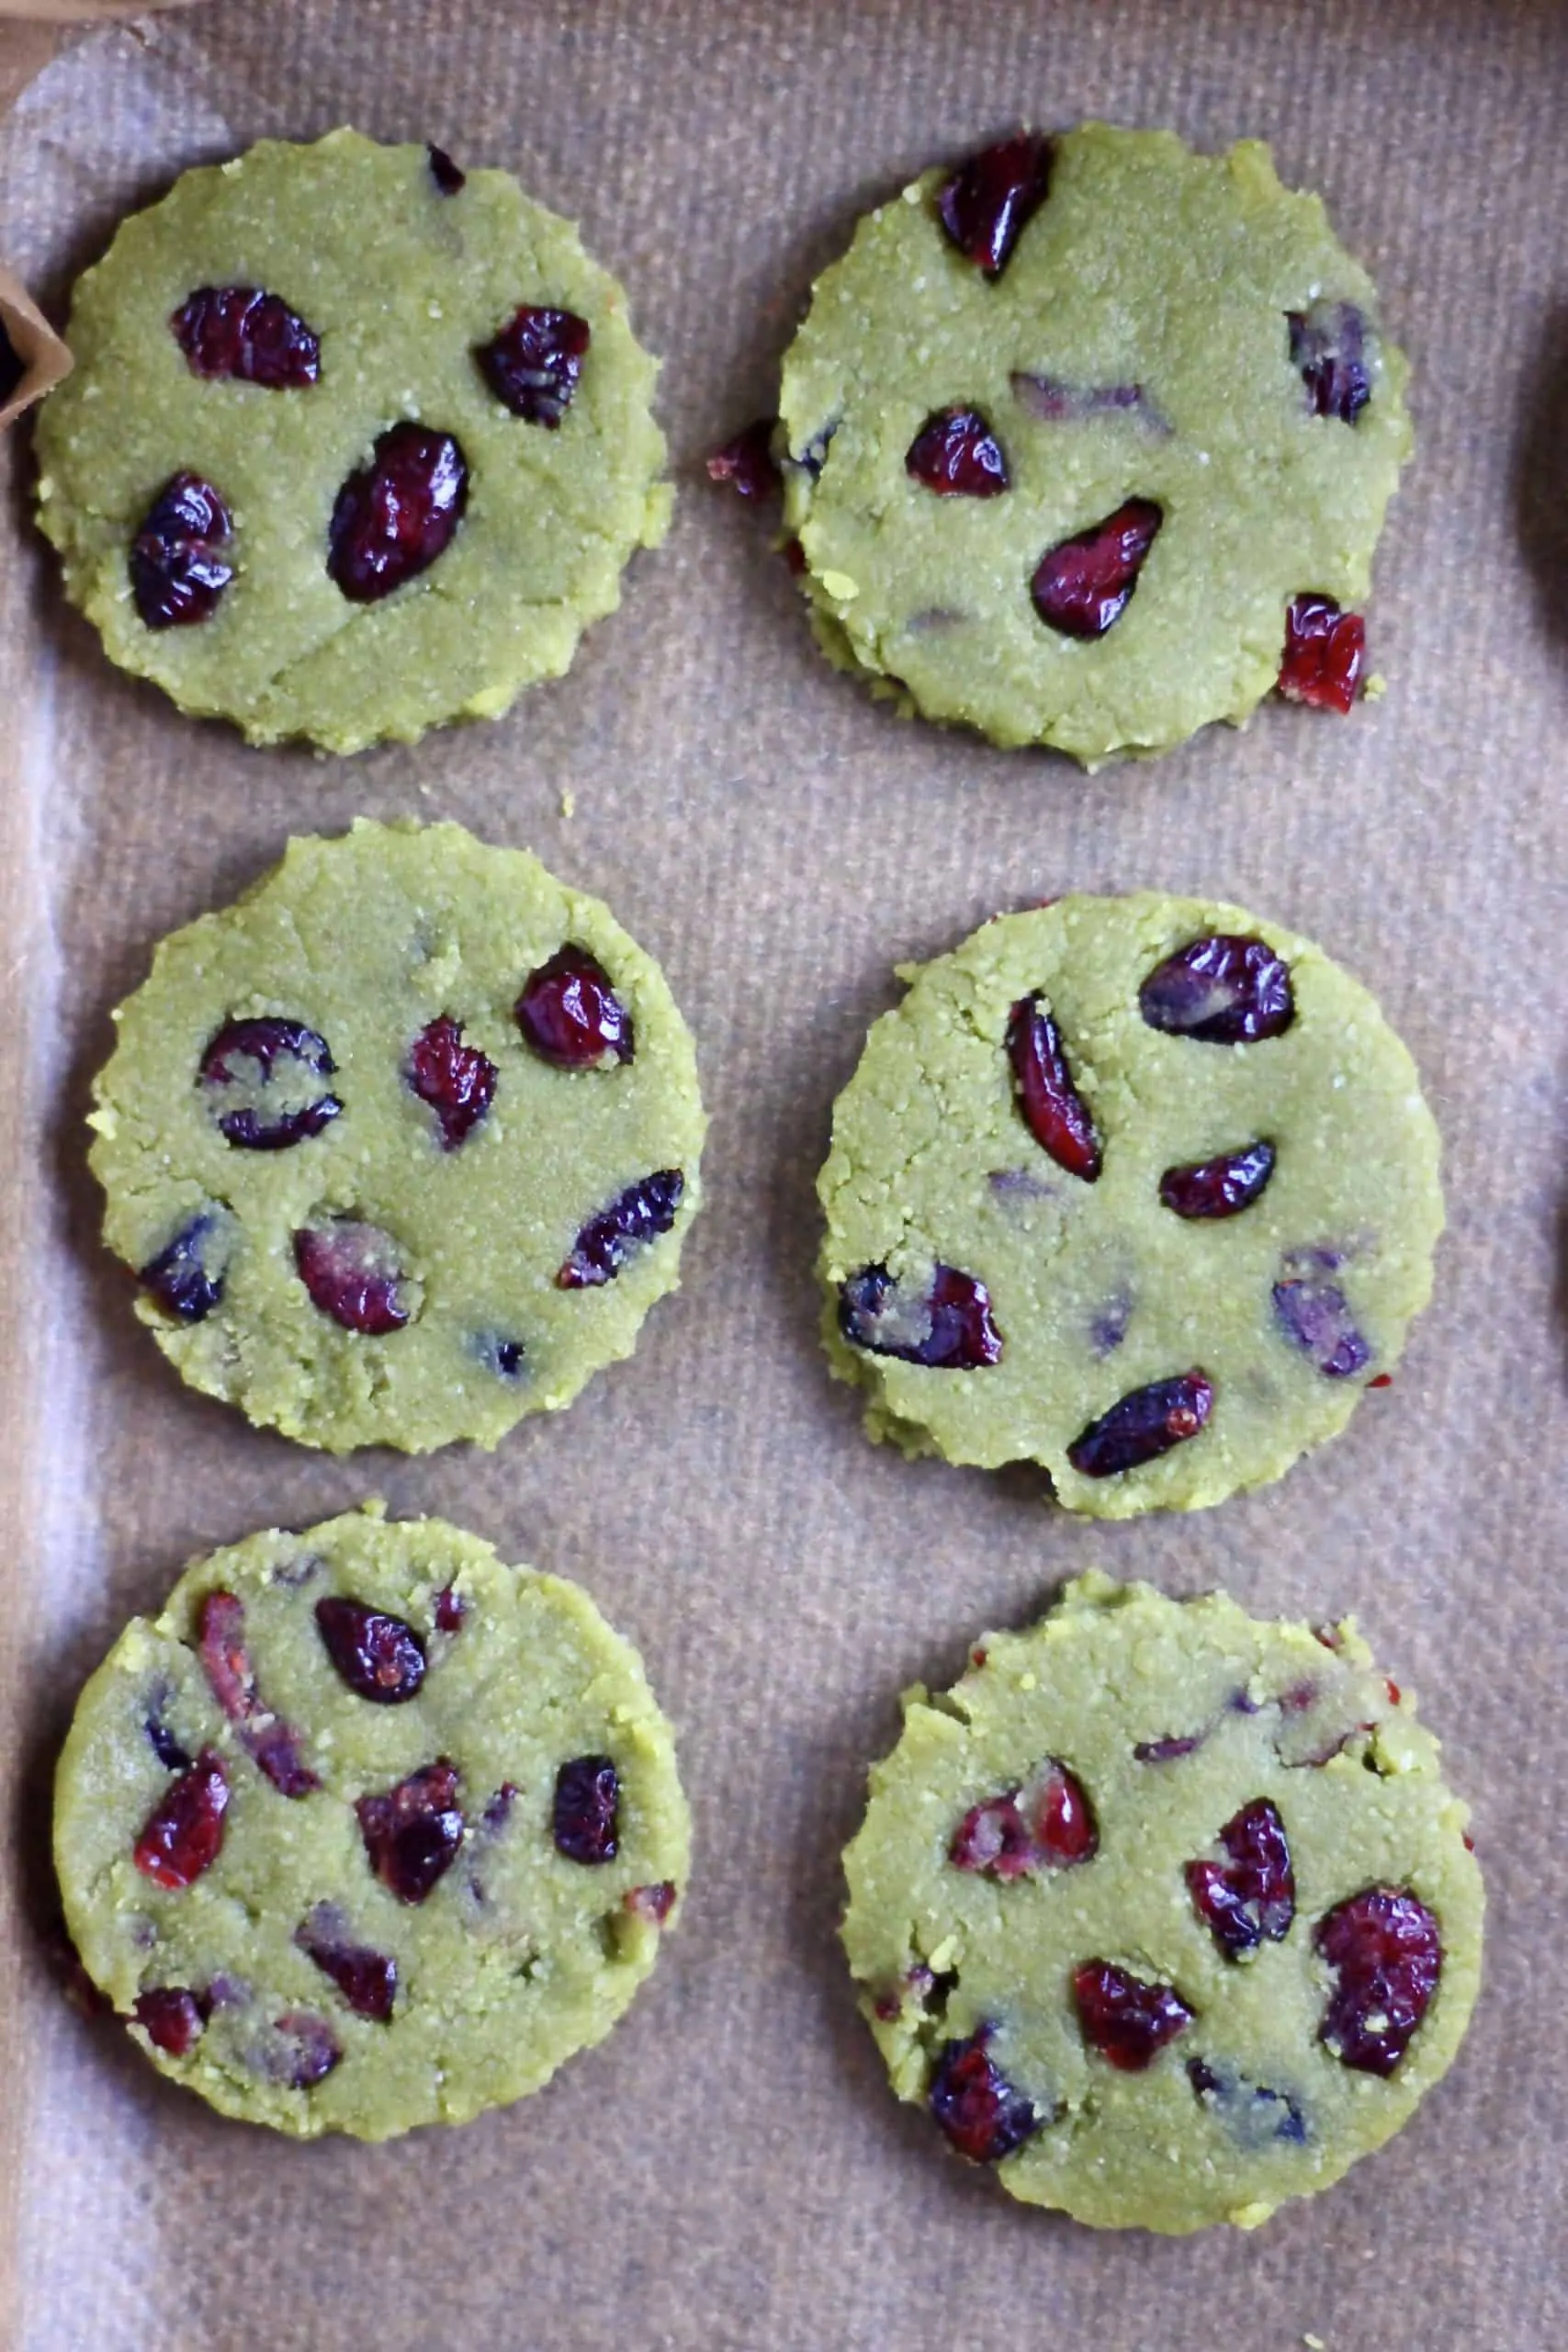 Six raw vegan matcha shortbread cookies with dried cranberries on a baking tray lined with baking paper